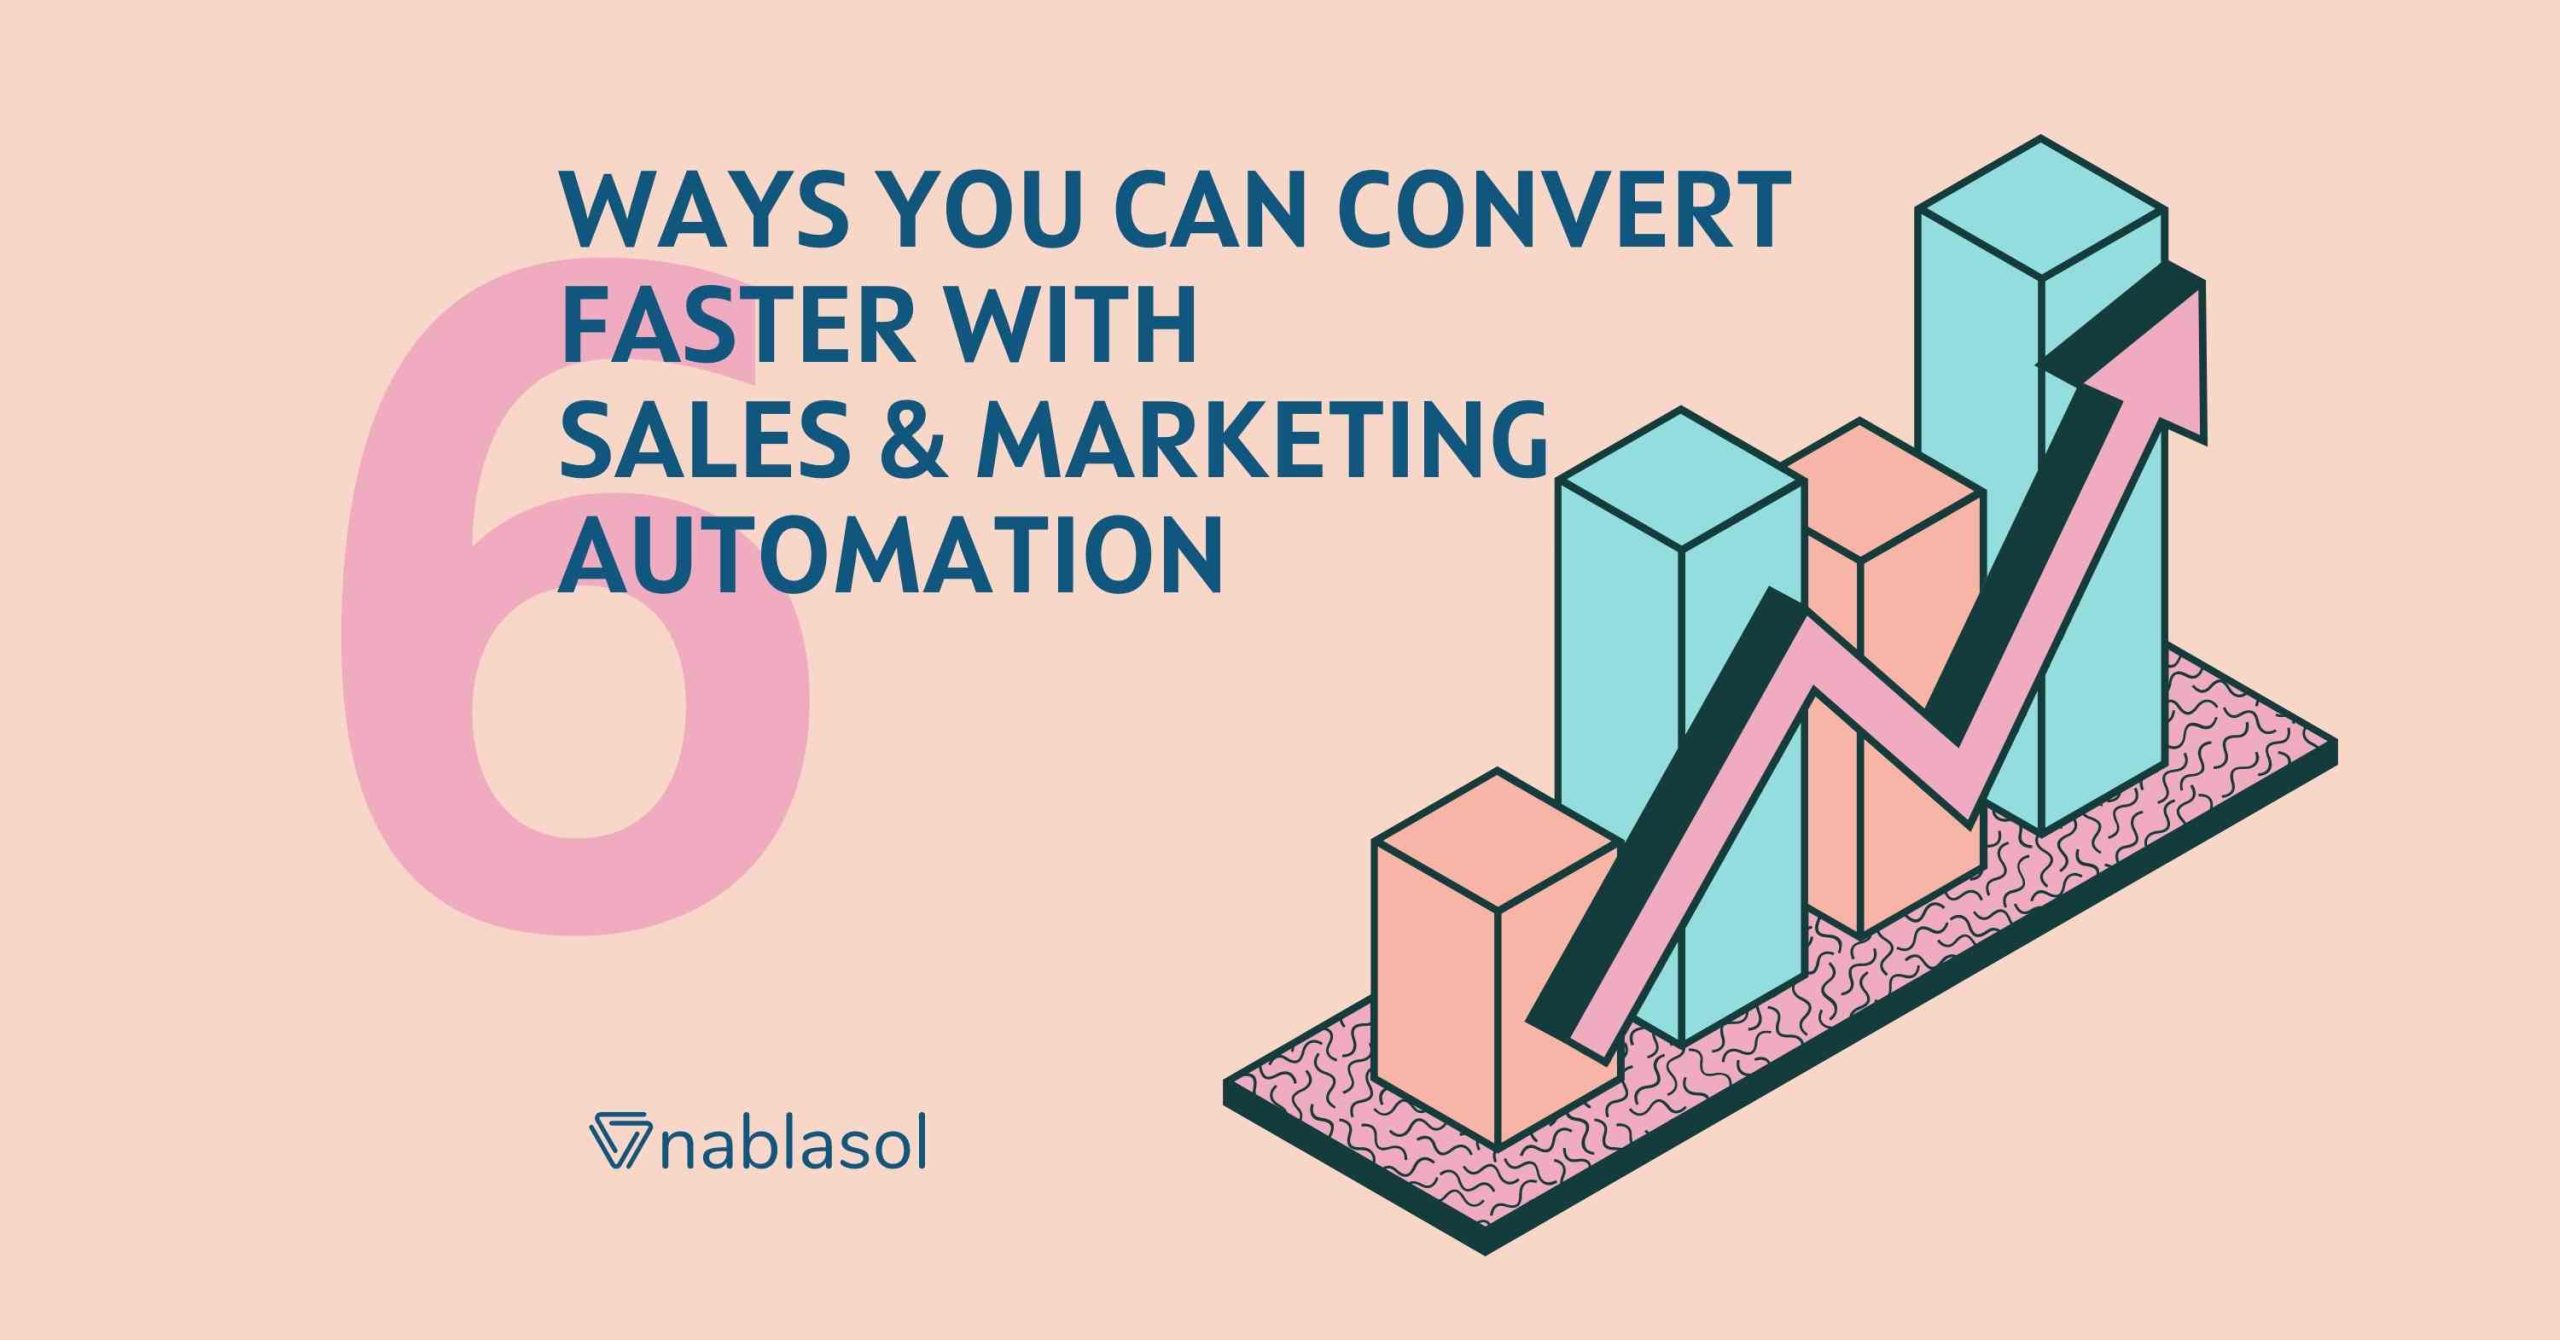 6 Ways You Can Convert Faster With Sales & Marketing Automation